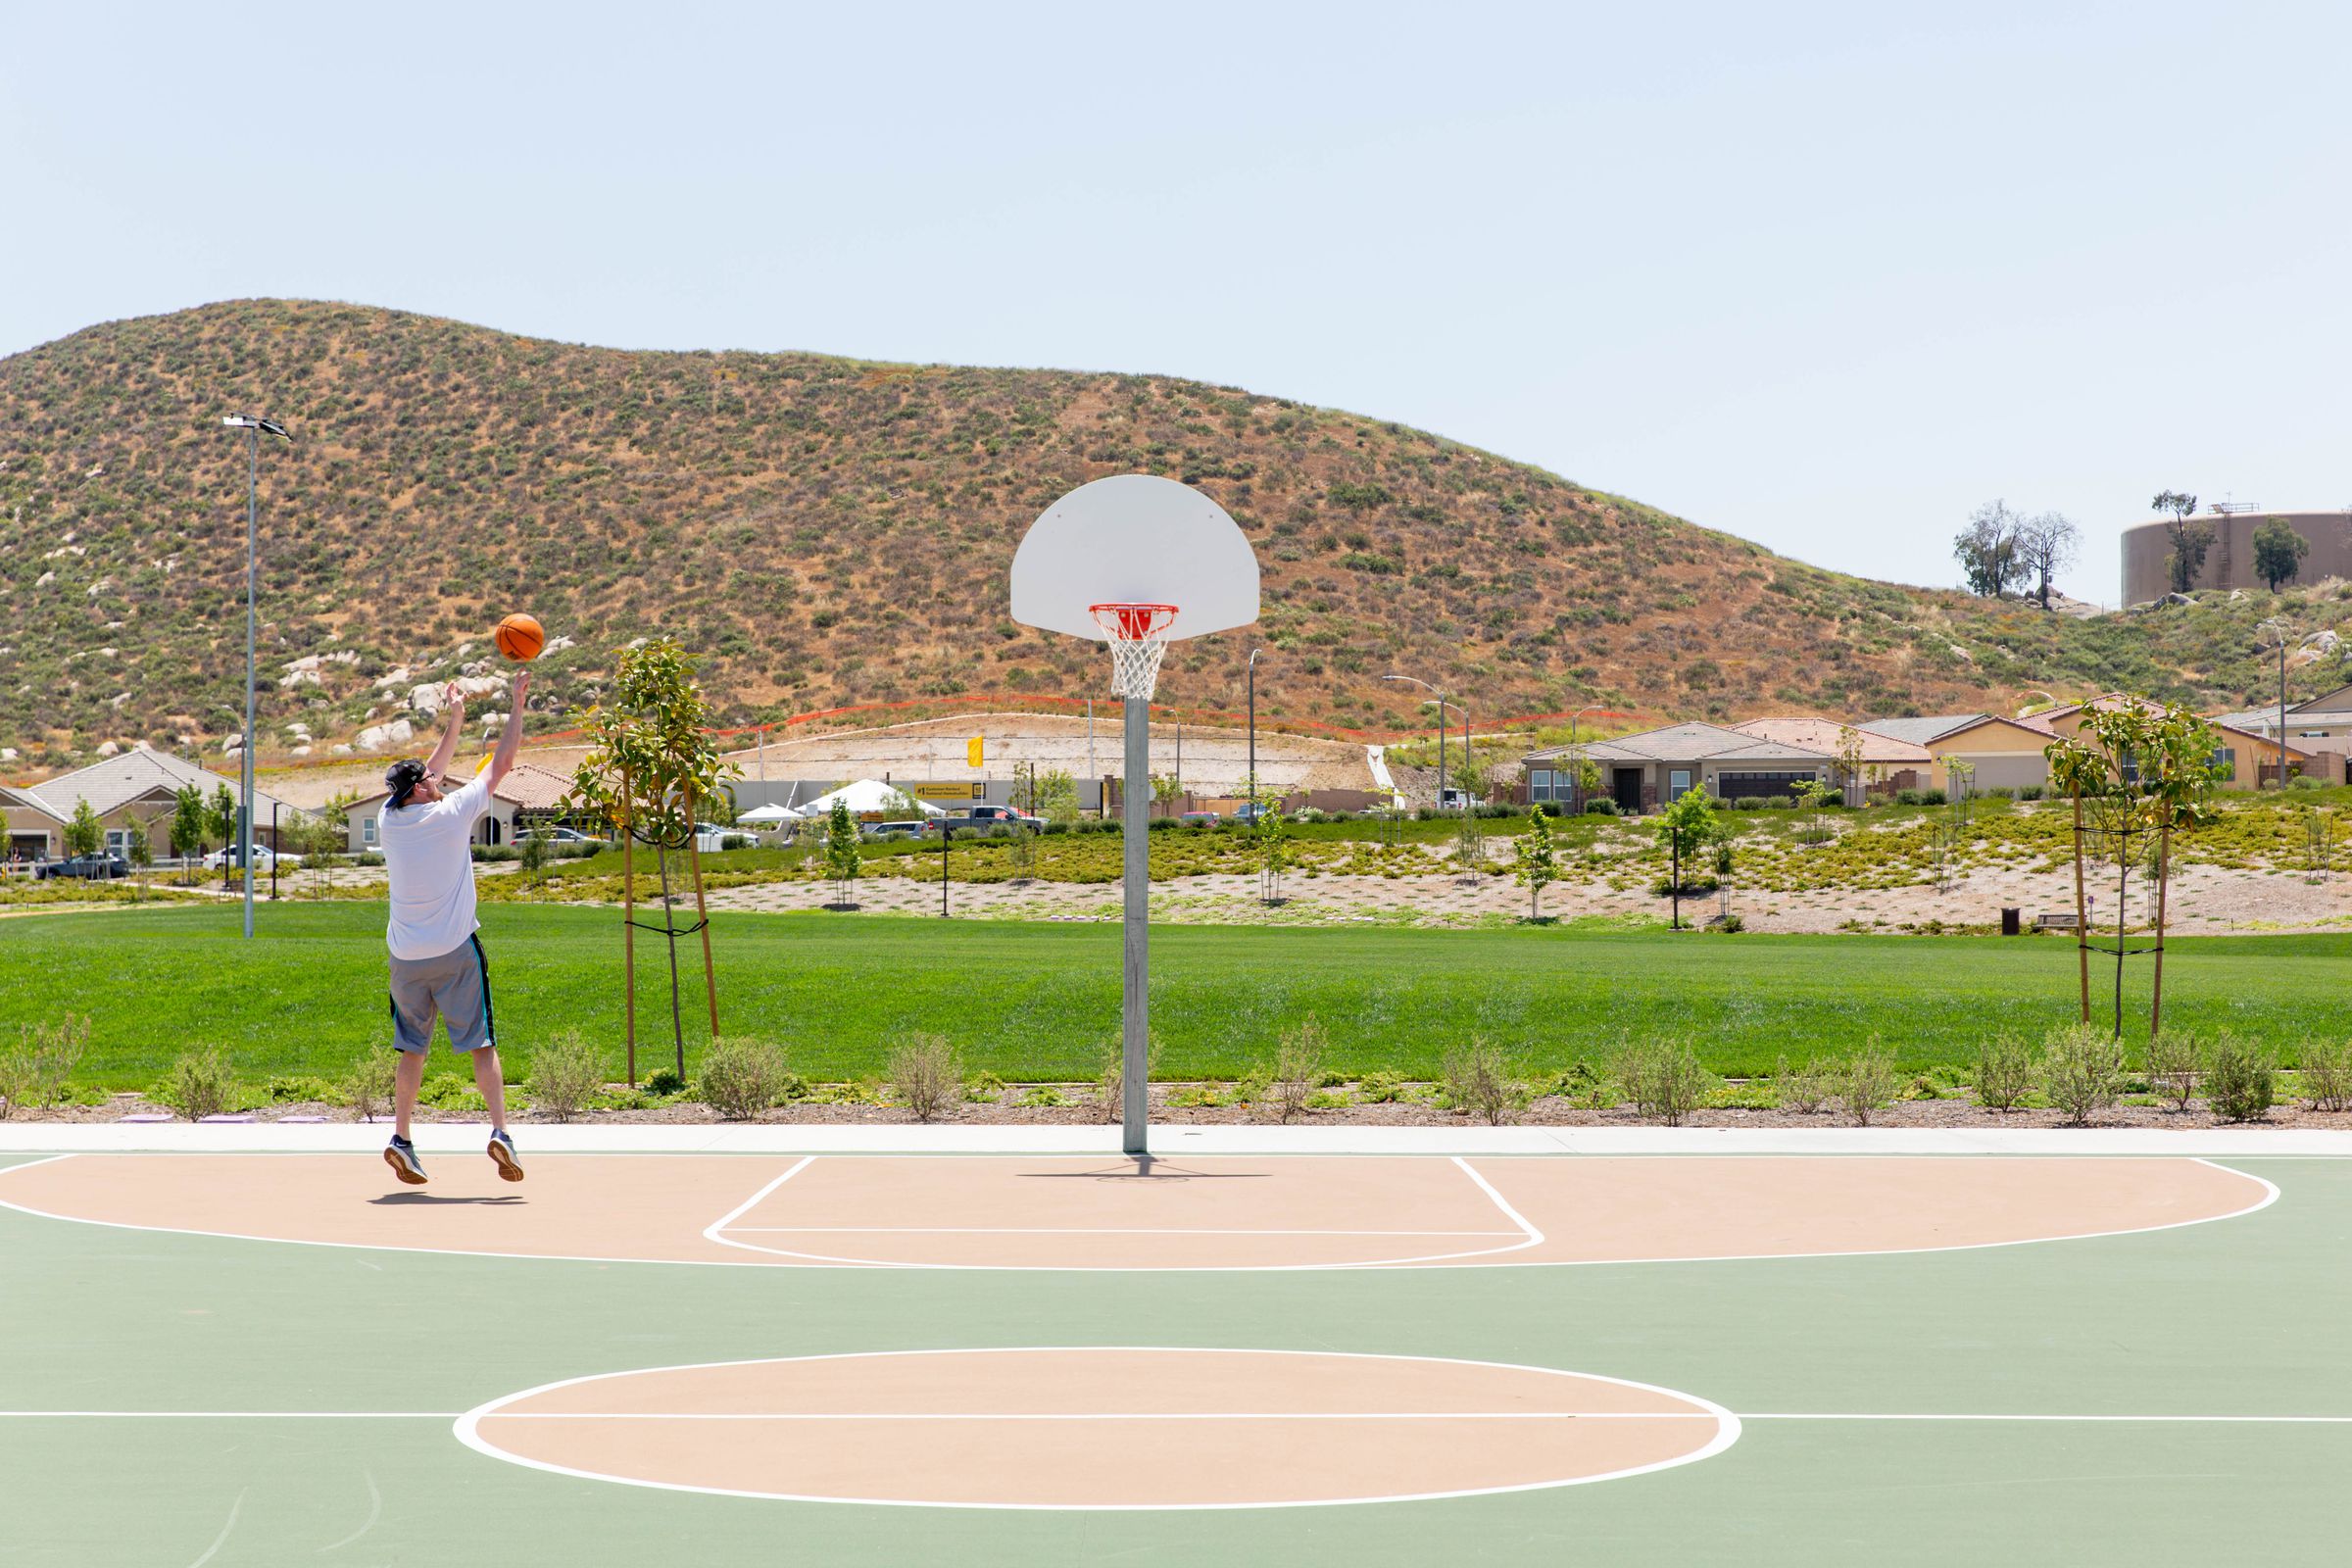 Terry Eichelberg plays basketball on Monday at the new park at KB Home’s Durango at Shadow Mountain.